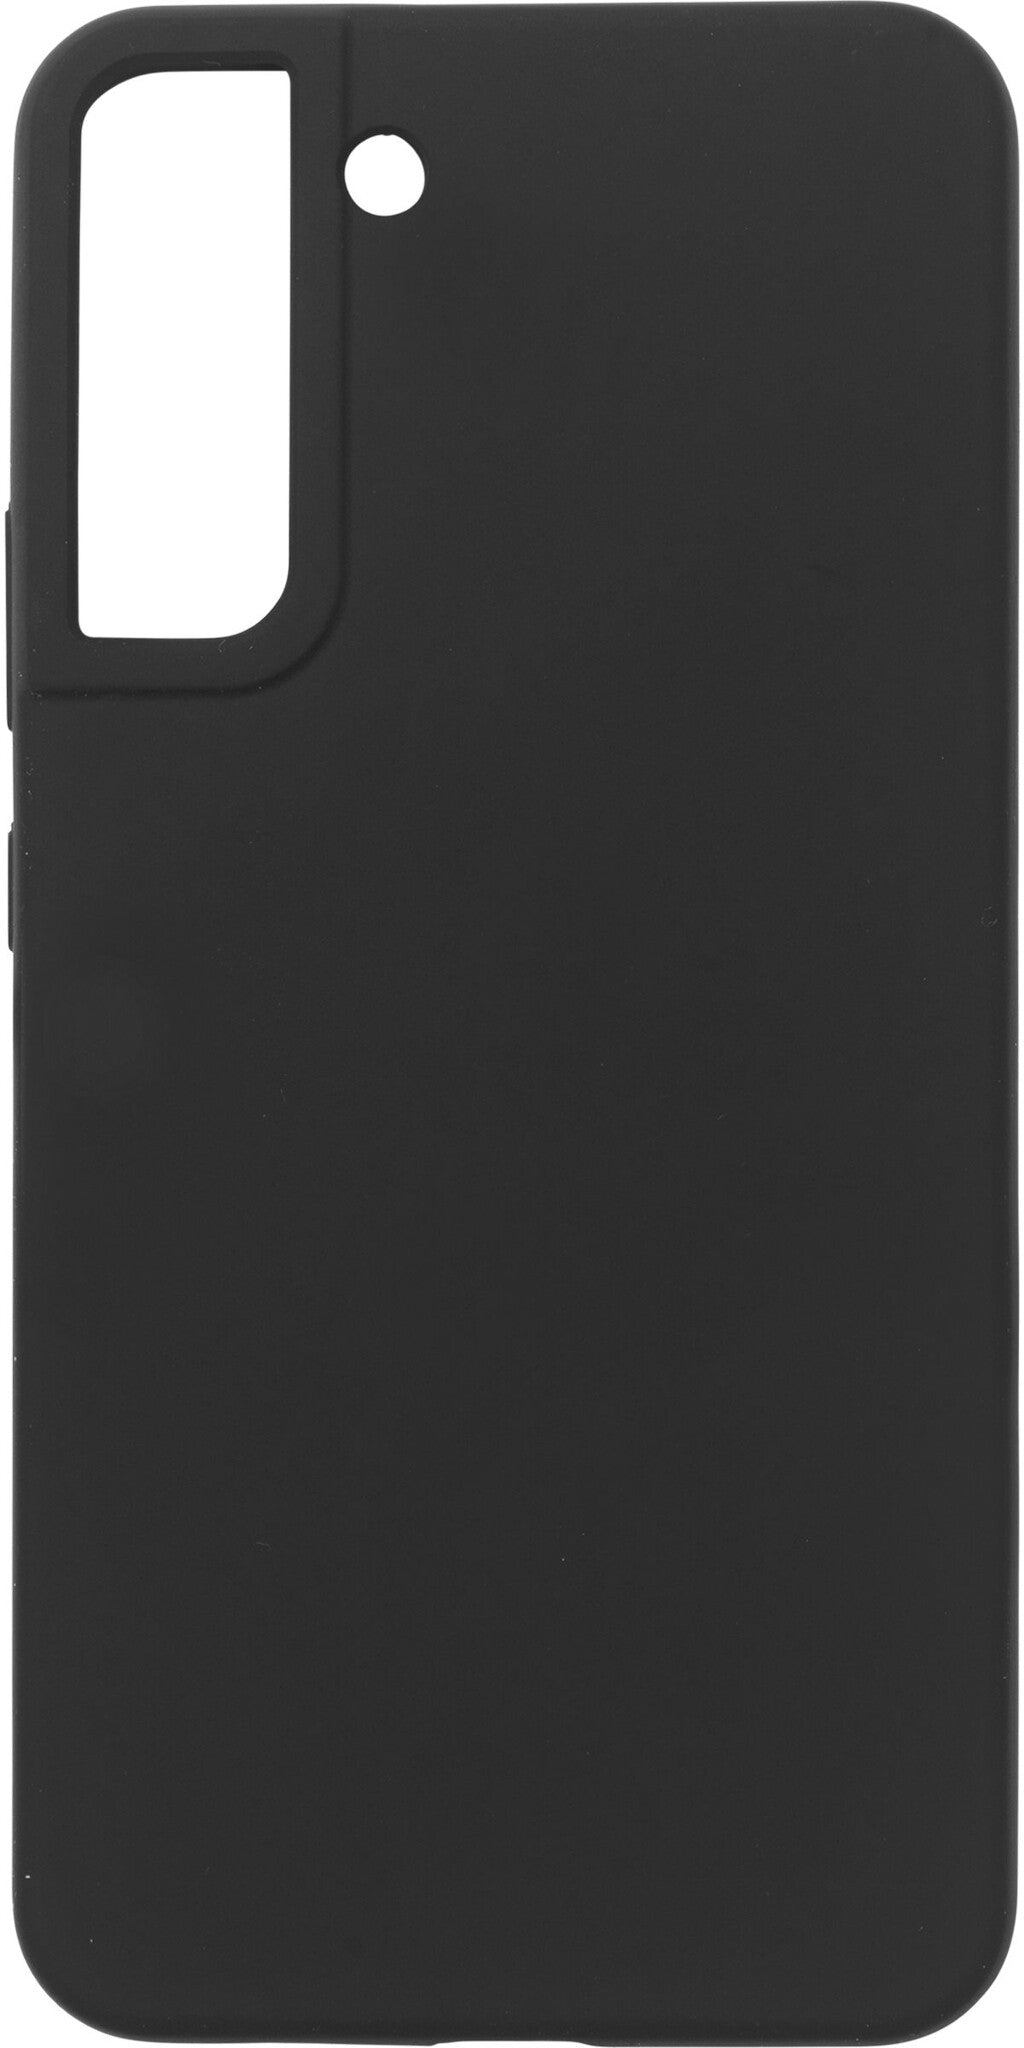 eSTUFF MADRID mobile phone case for Galaxy S22+ in Black